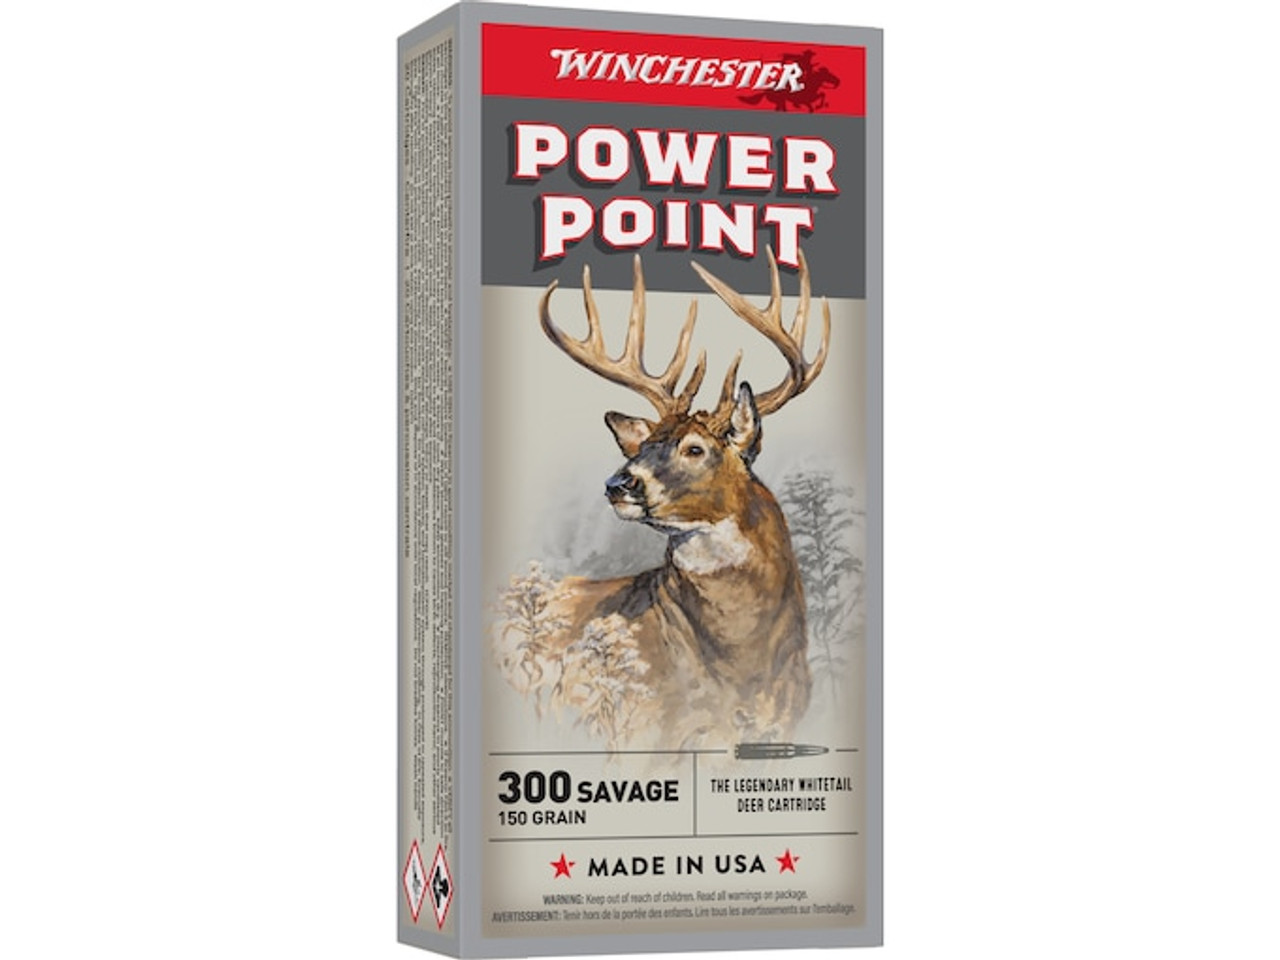 Decades of success on whitetail and big game has made Winchester Power-Point truly legendary. The time-proven dependability is offered in a wide range of calibers and bullet weights, and will be filling tags for generations to come. The saying goes, legends are not born, they are made. This ammunition is new production, non-corrosive, in boxer primed, reloadable brass cases.

 

Features

Quick knock down
Excellent accuracy
Deeper penetration